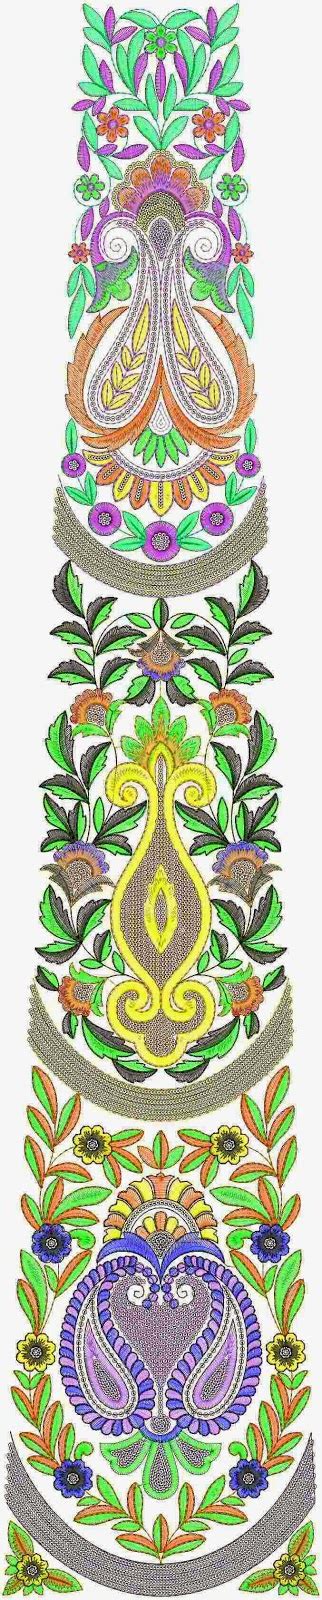 Embdesigntube Variegated Embroidery Kali Patch Designs For Wedding Season